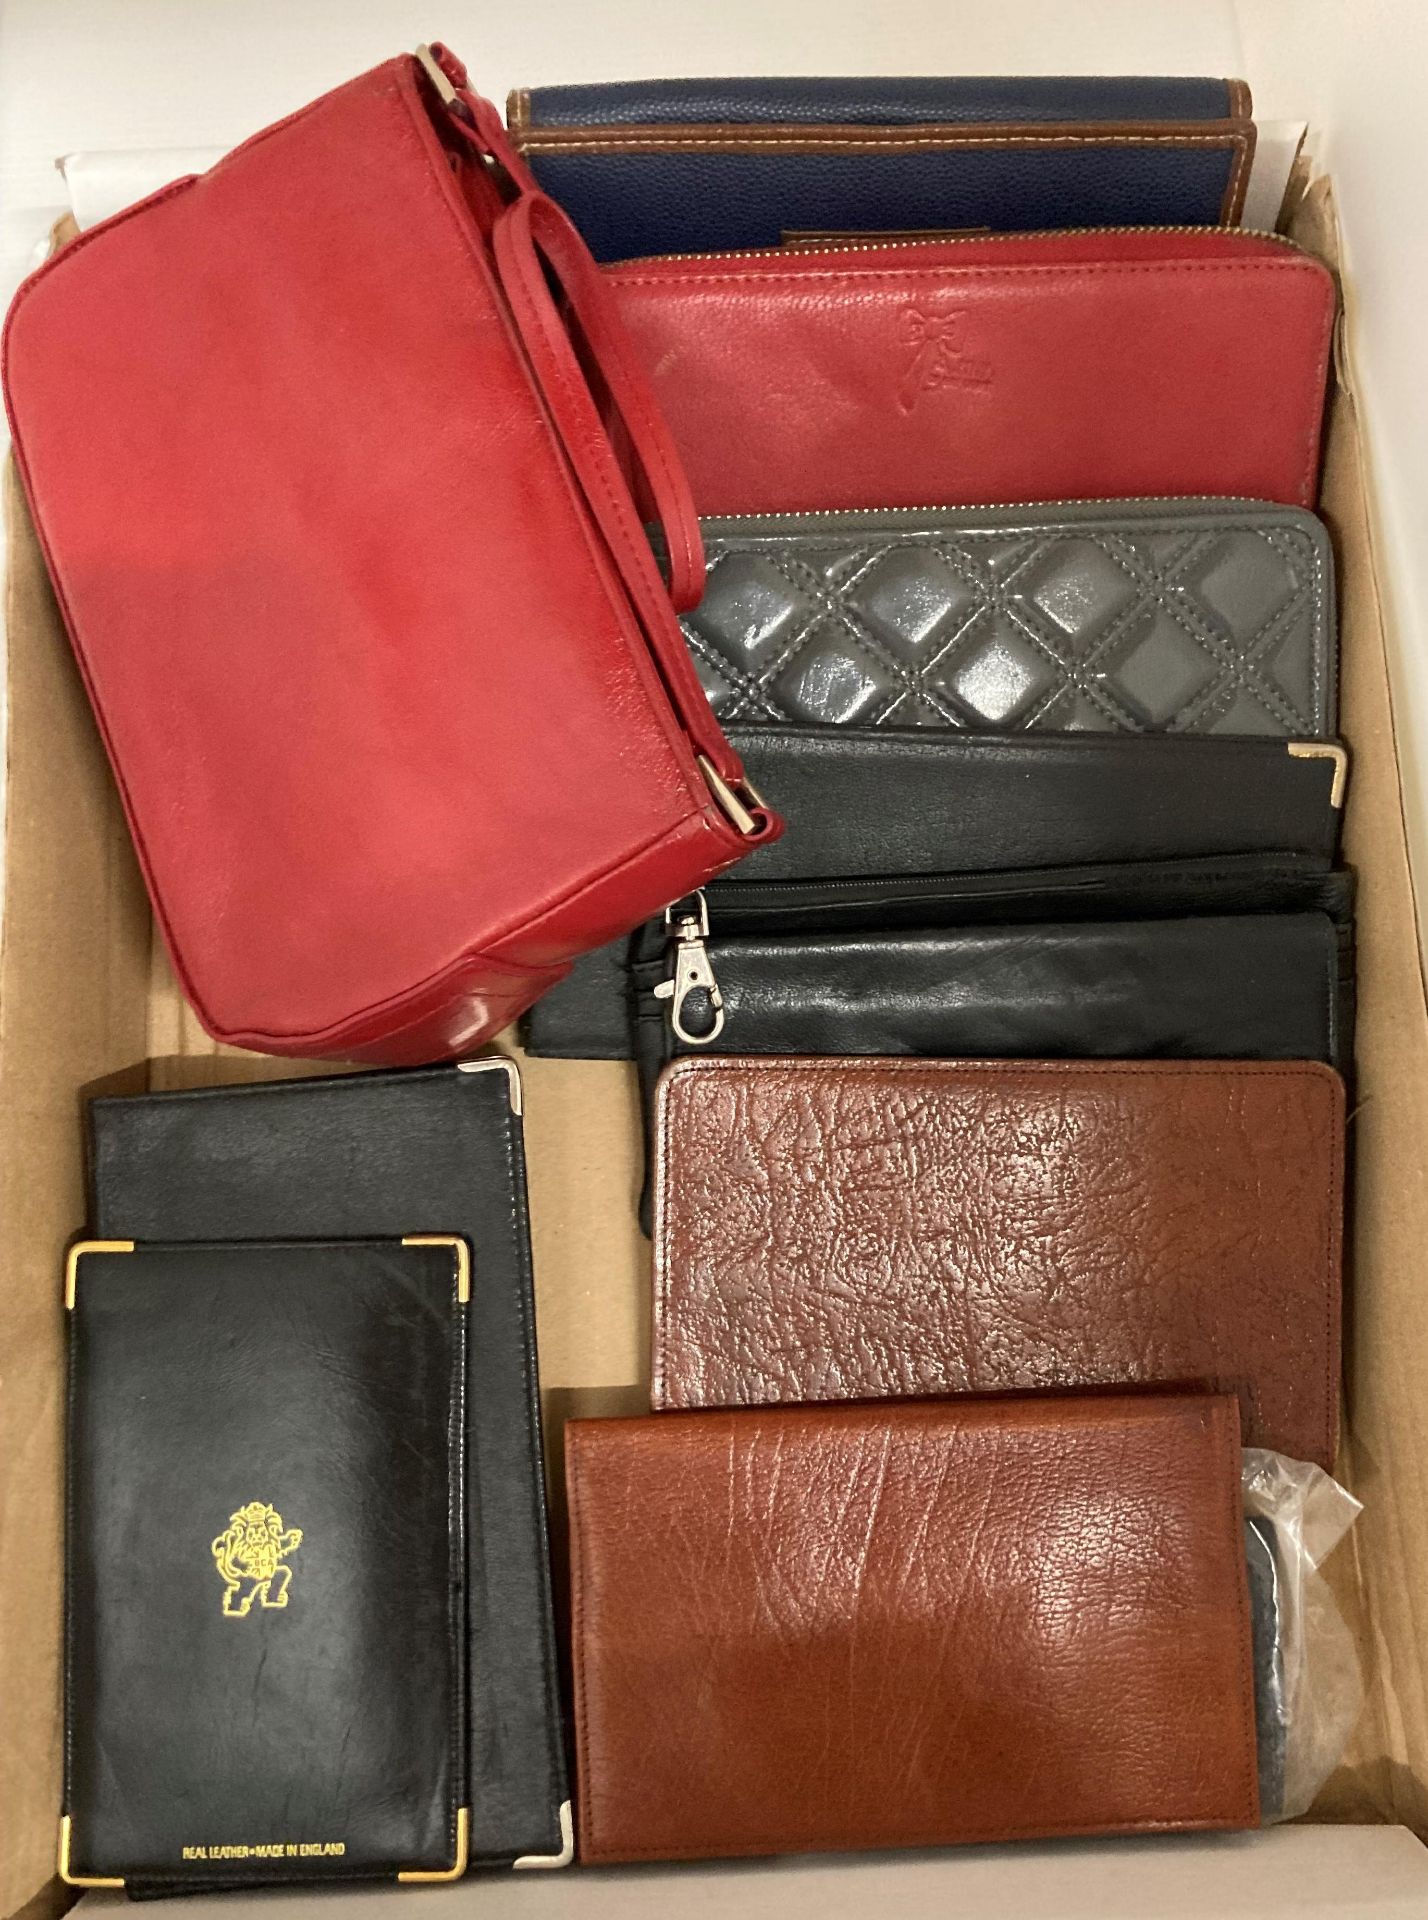 Contents to tray - red handbag and assorted purses, leather pocketbooks, etc. - Image 2 of 2